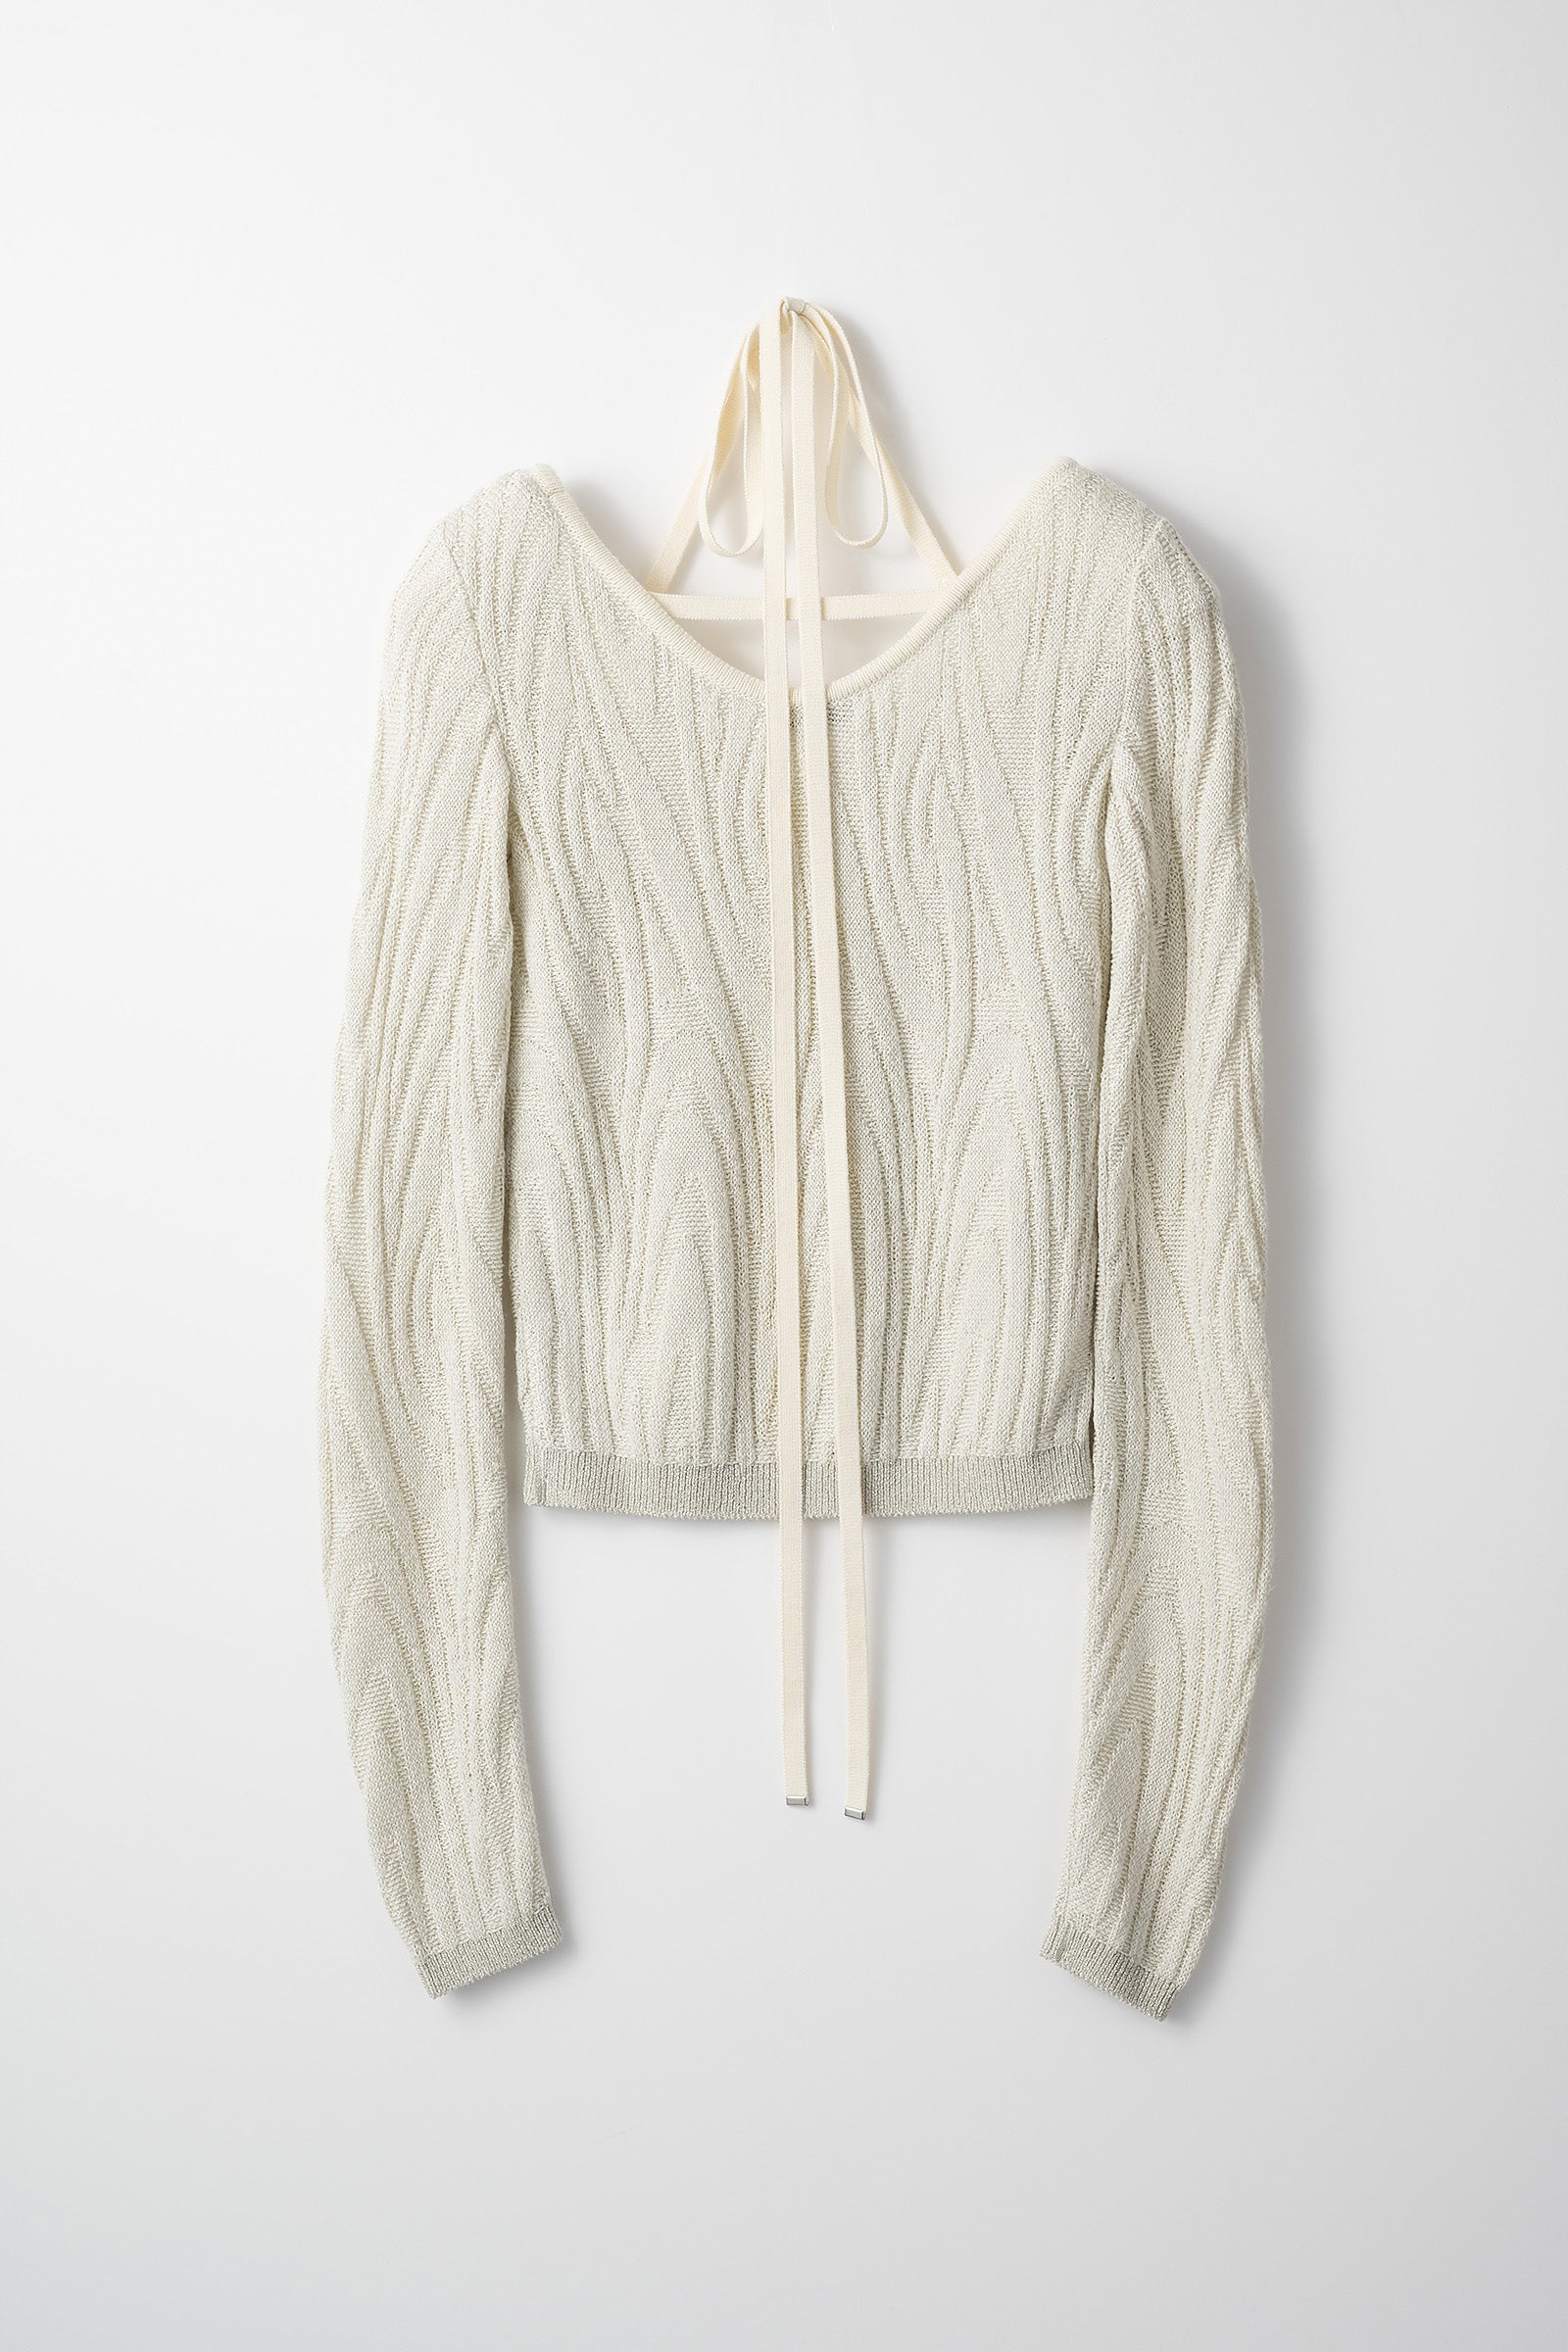 Frost knit top (Ivory)